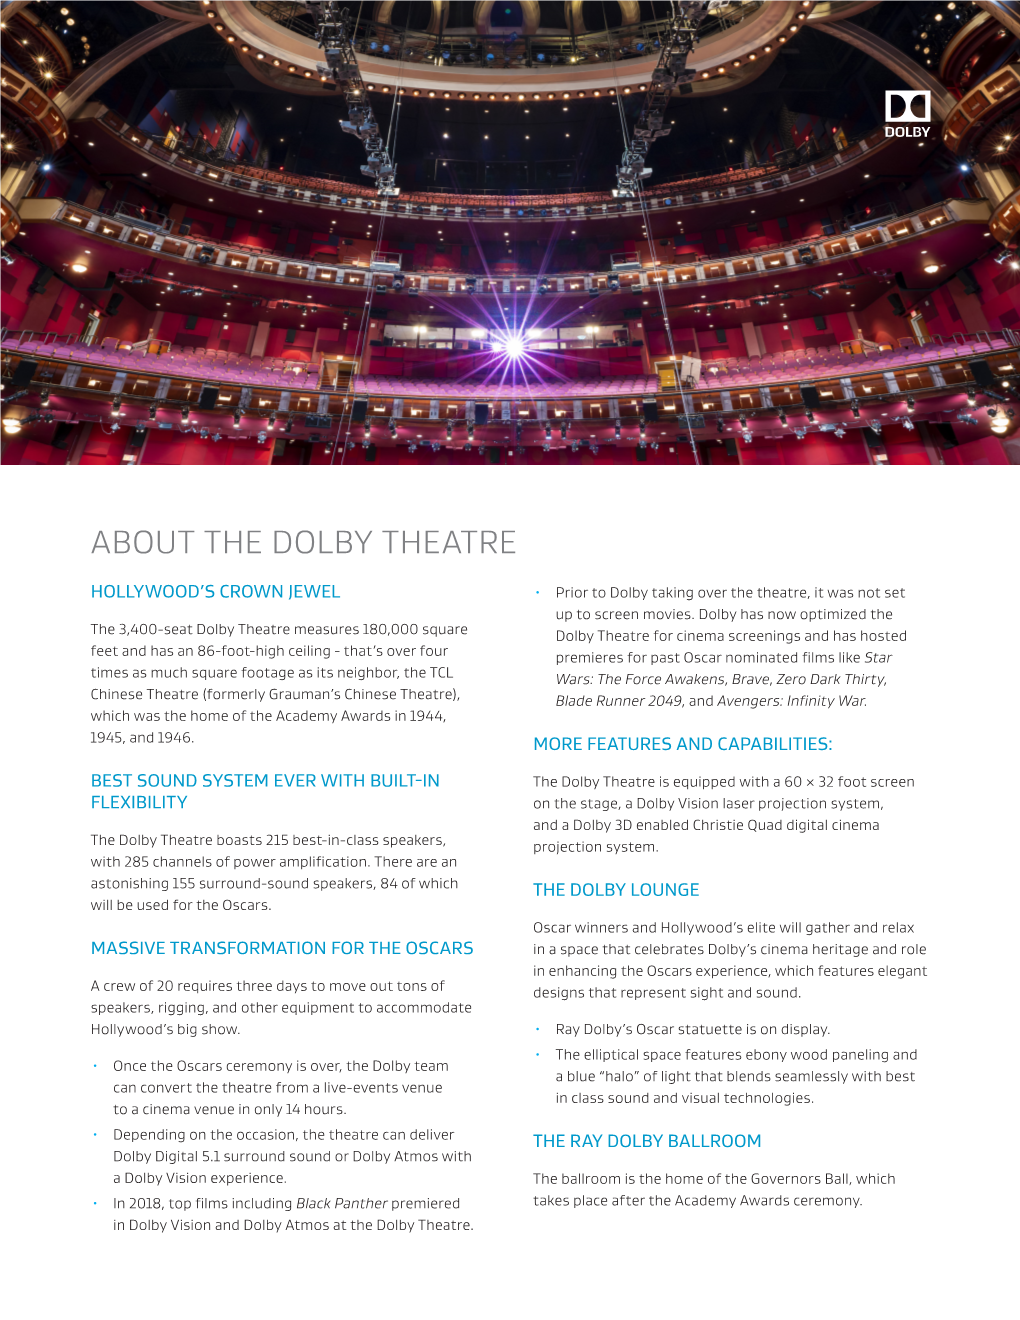 About the Dolby Theatre